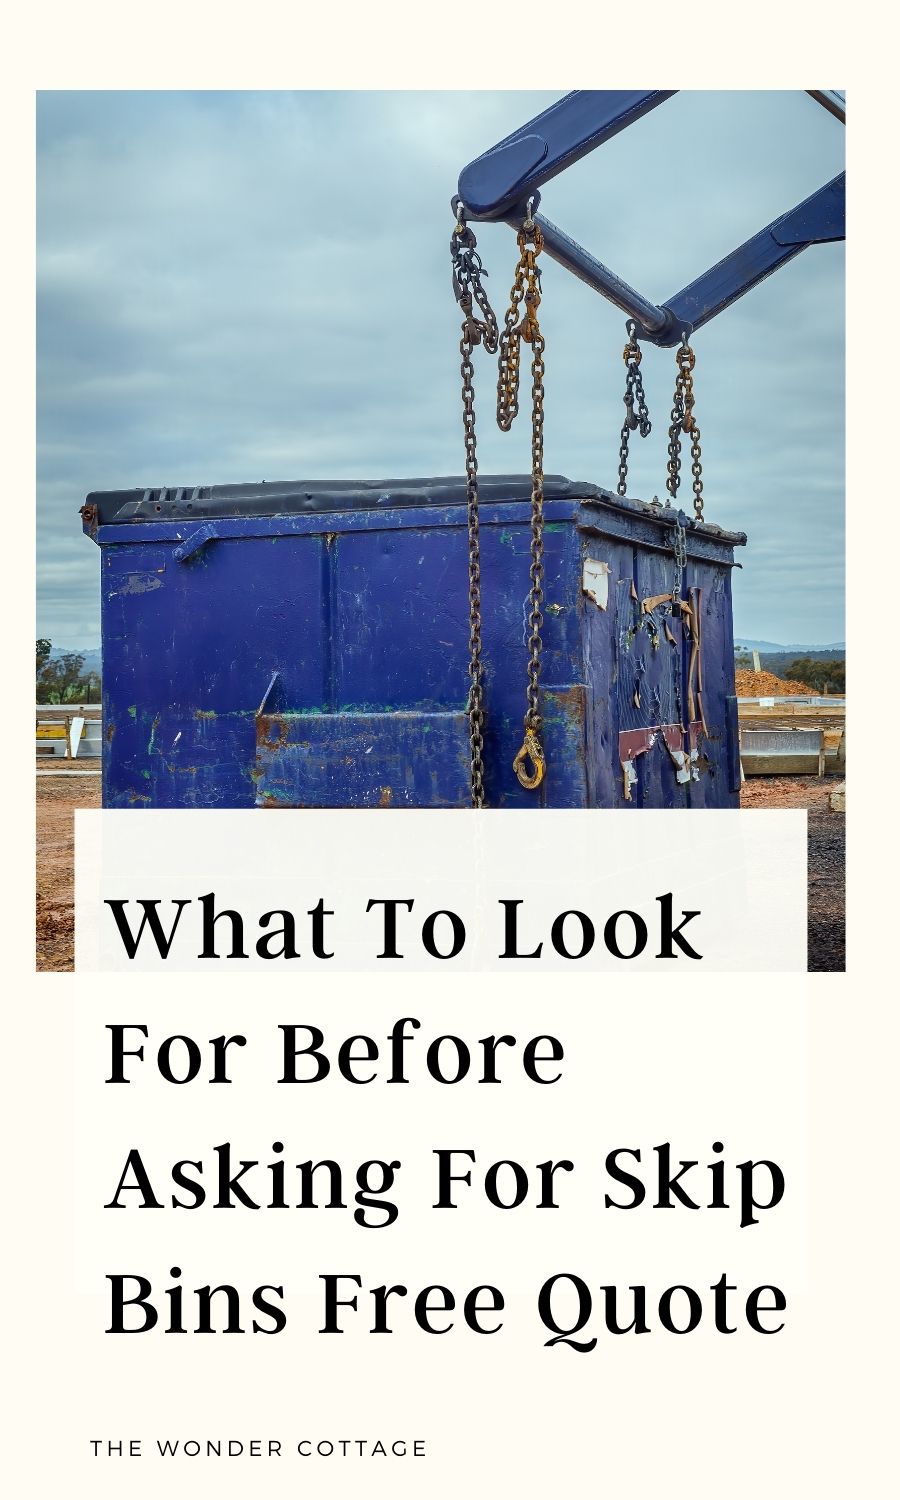 What To Look For Before Asking For Skip Bins Free Quote